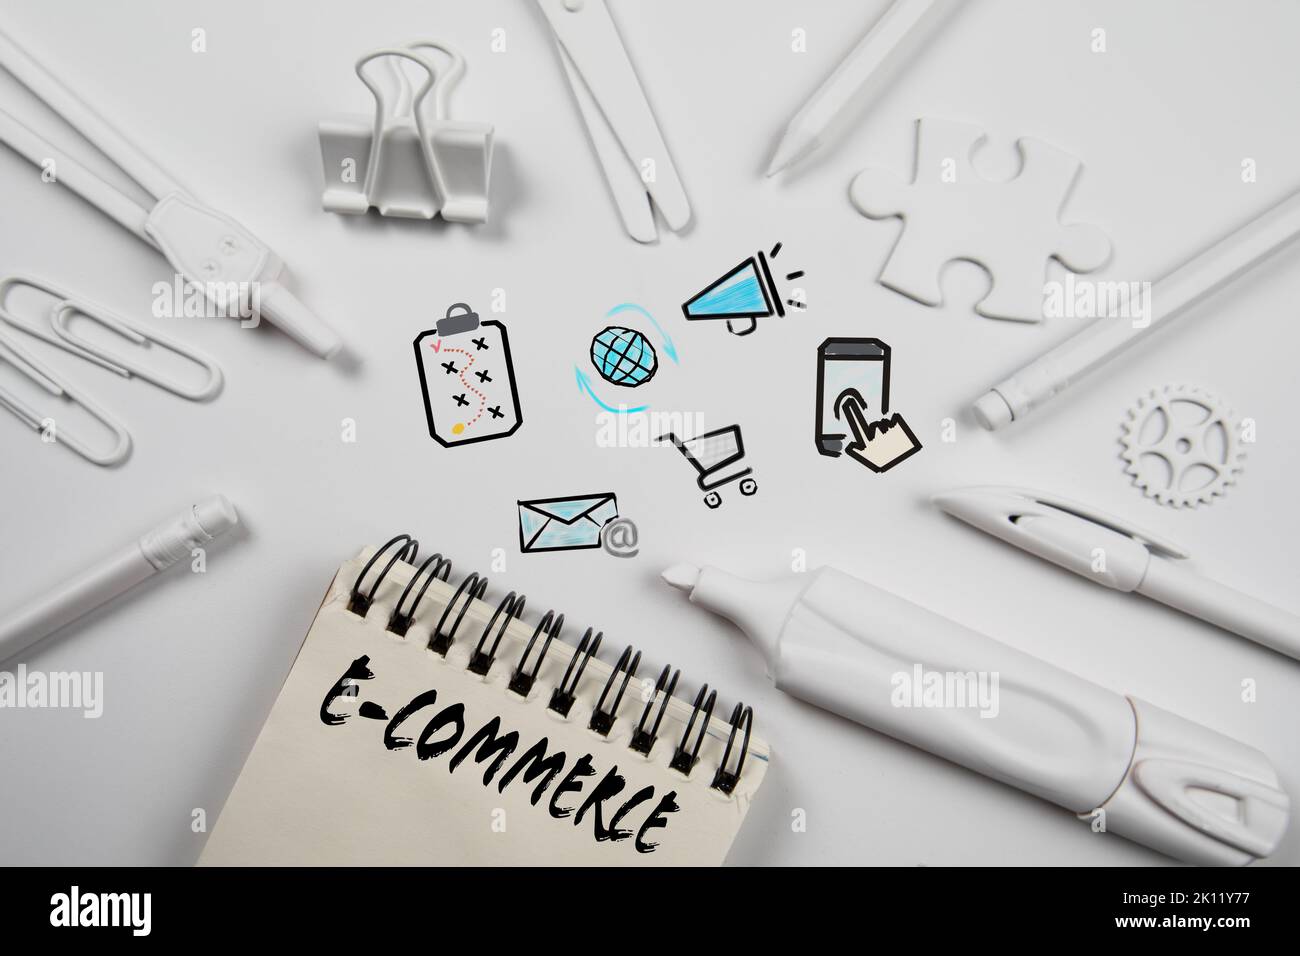 E-Commerce Business Concept. Abstract white office desk. Stock Photo